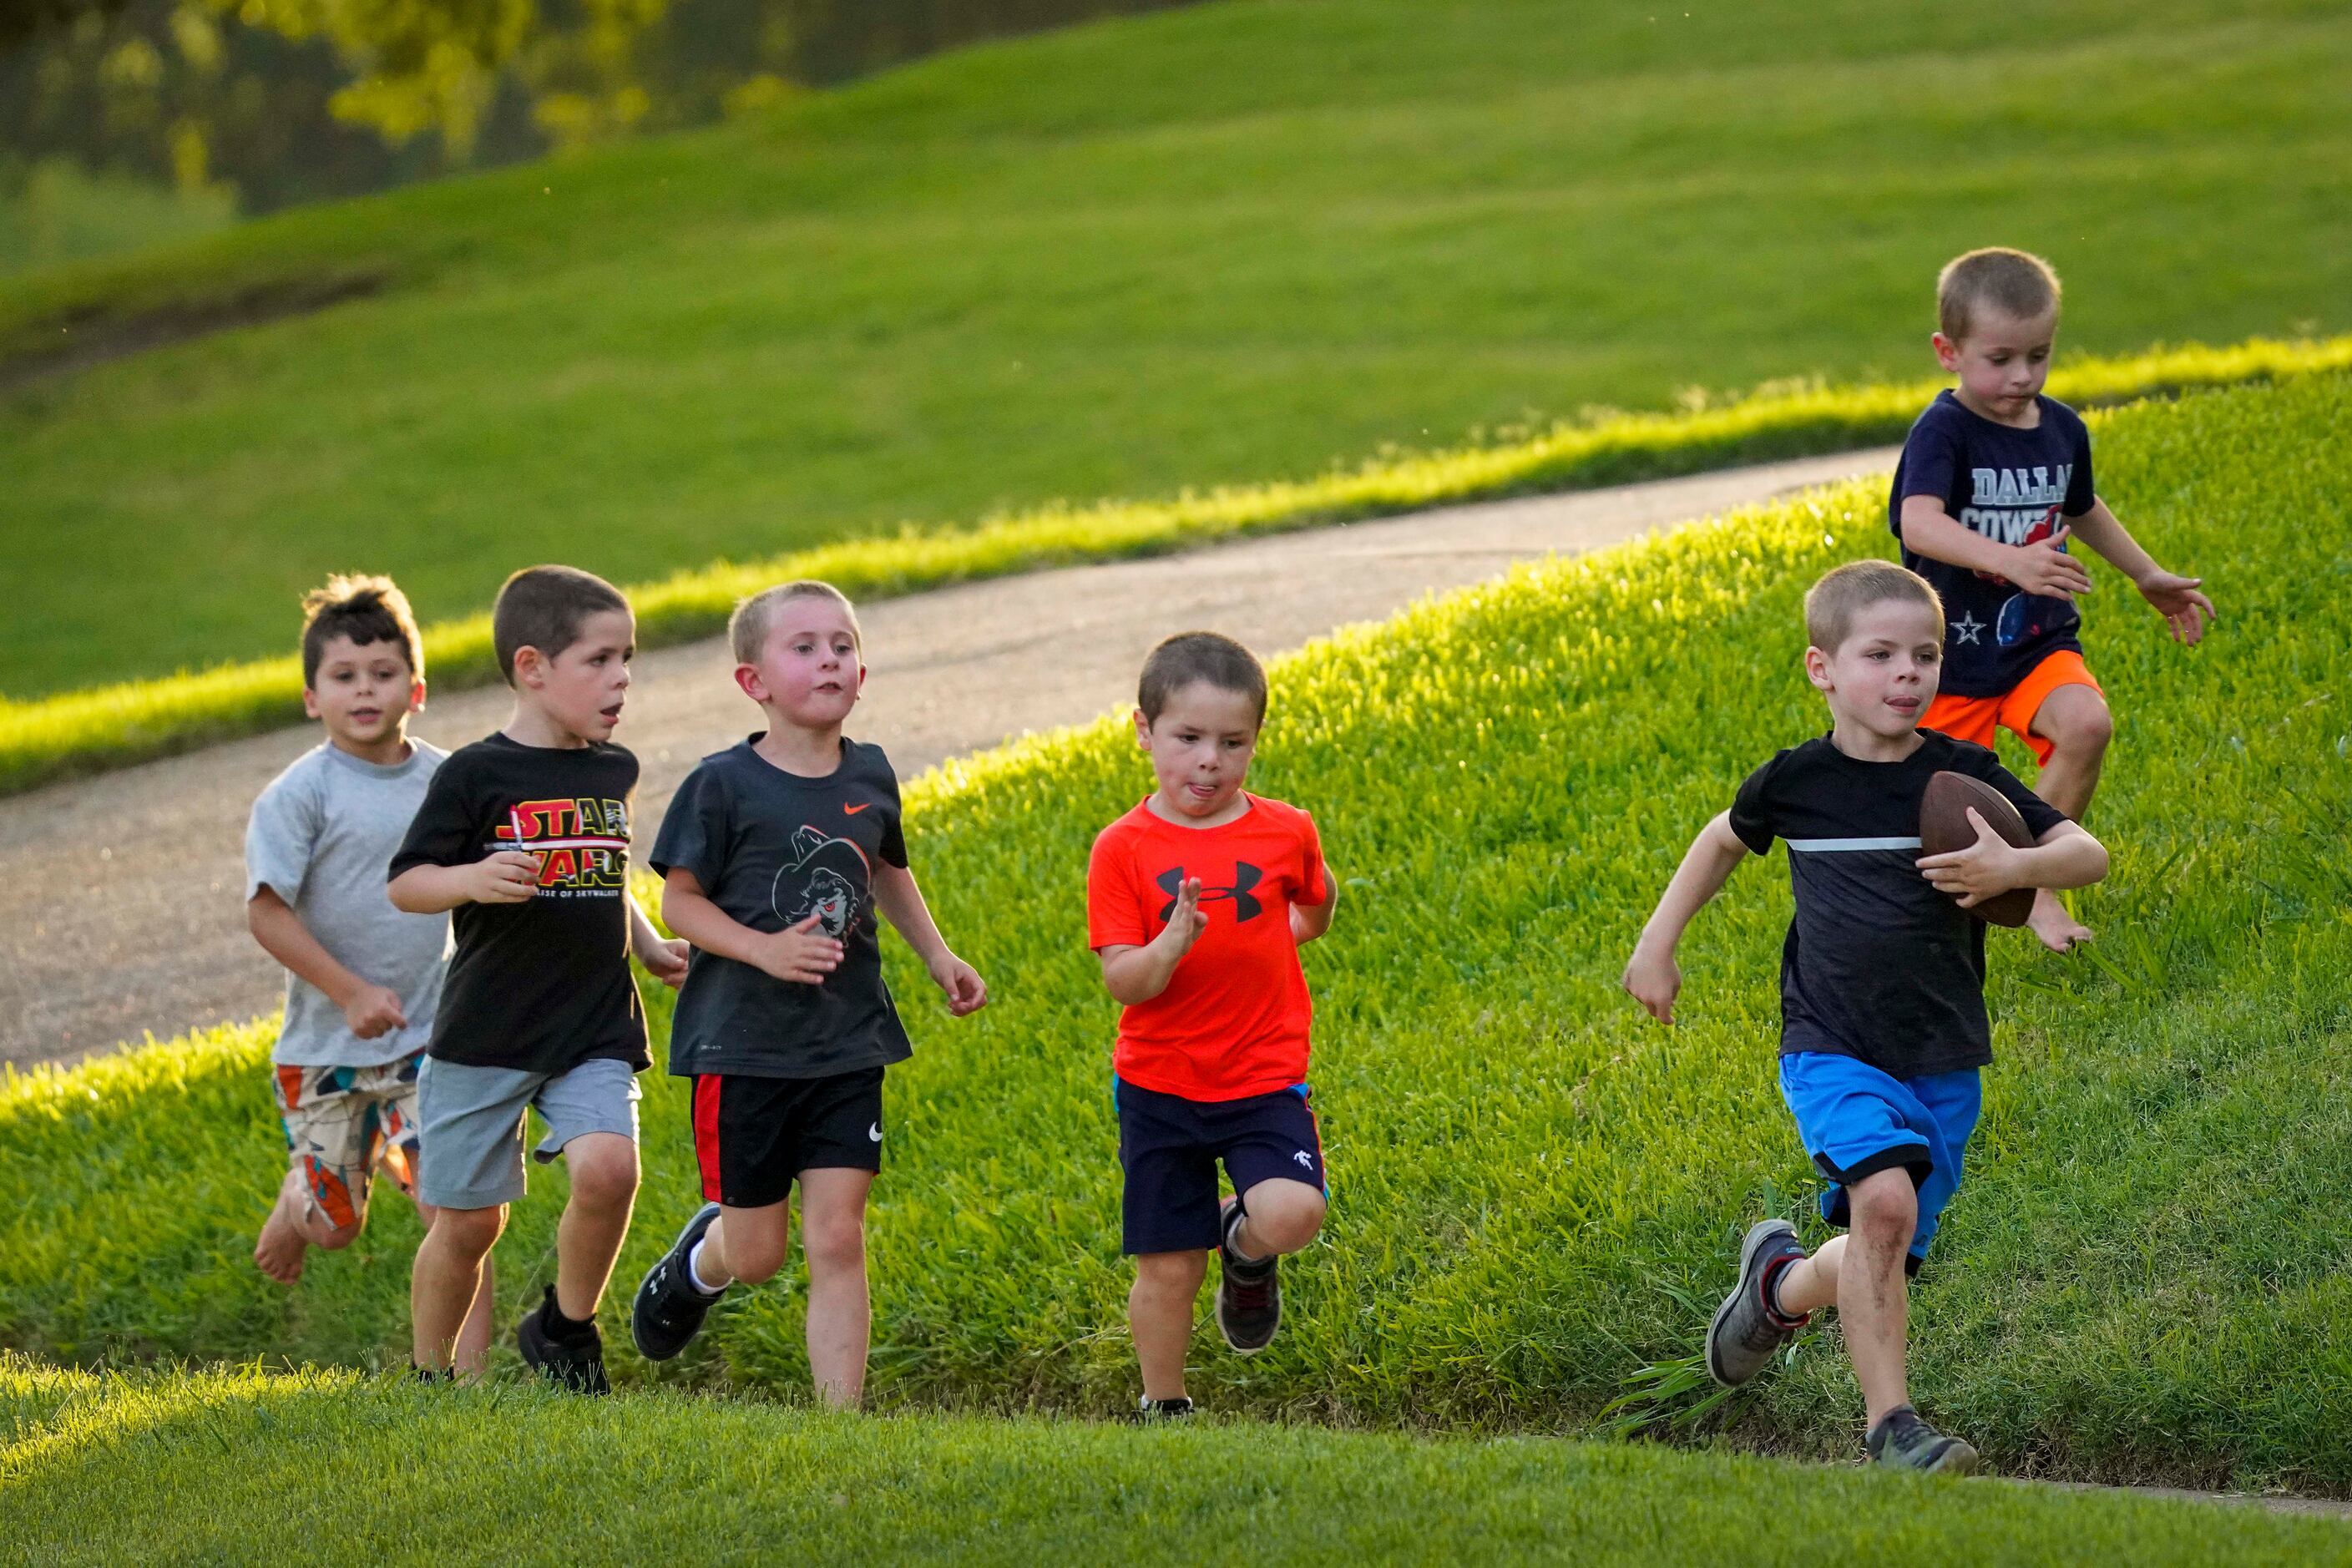 Grant Bass, 6, races down the sidewalk with a football while chased by other neighborhood...